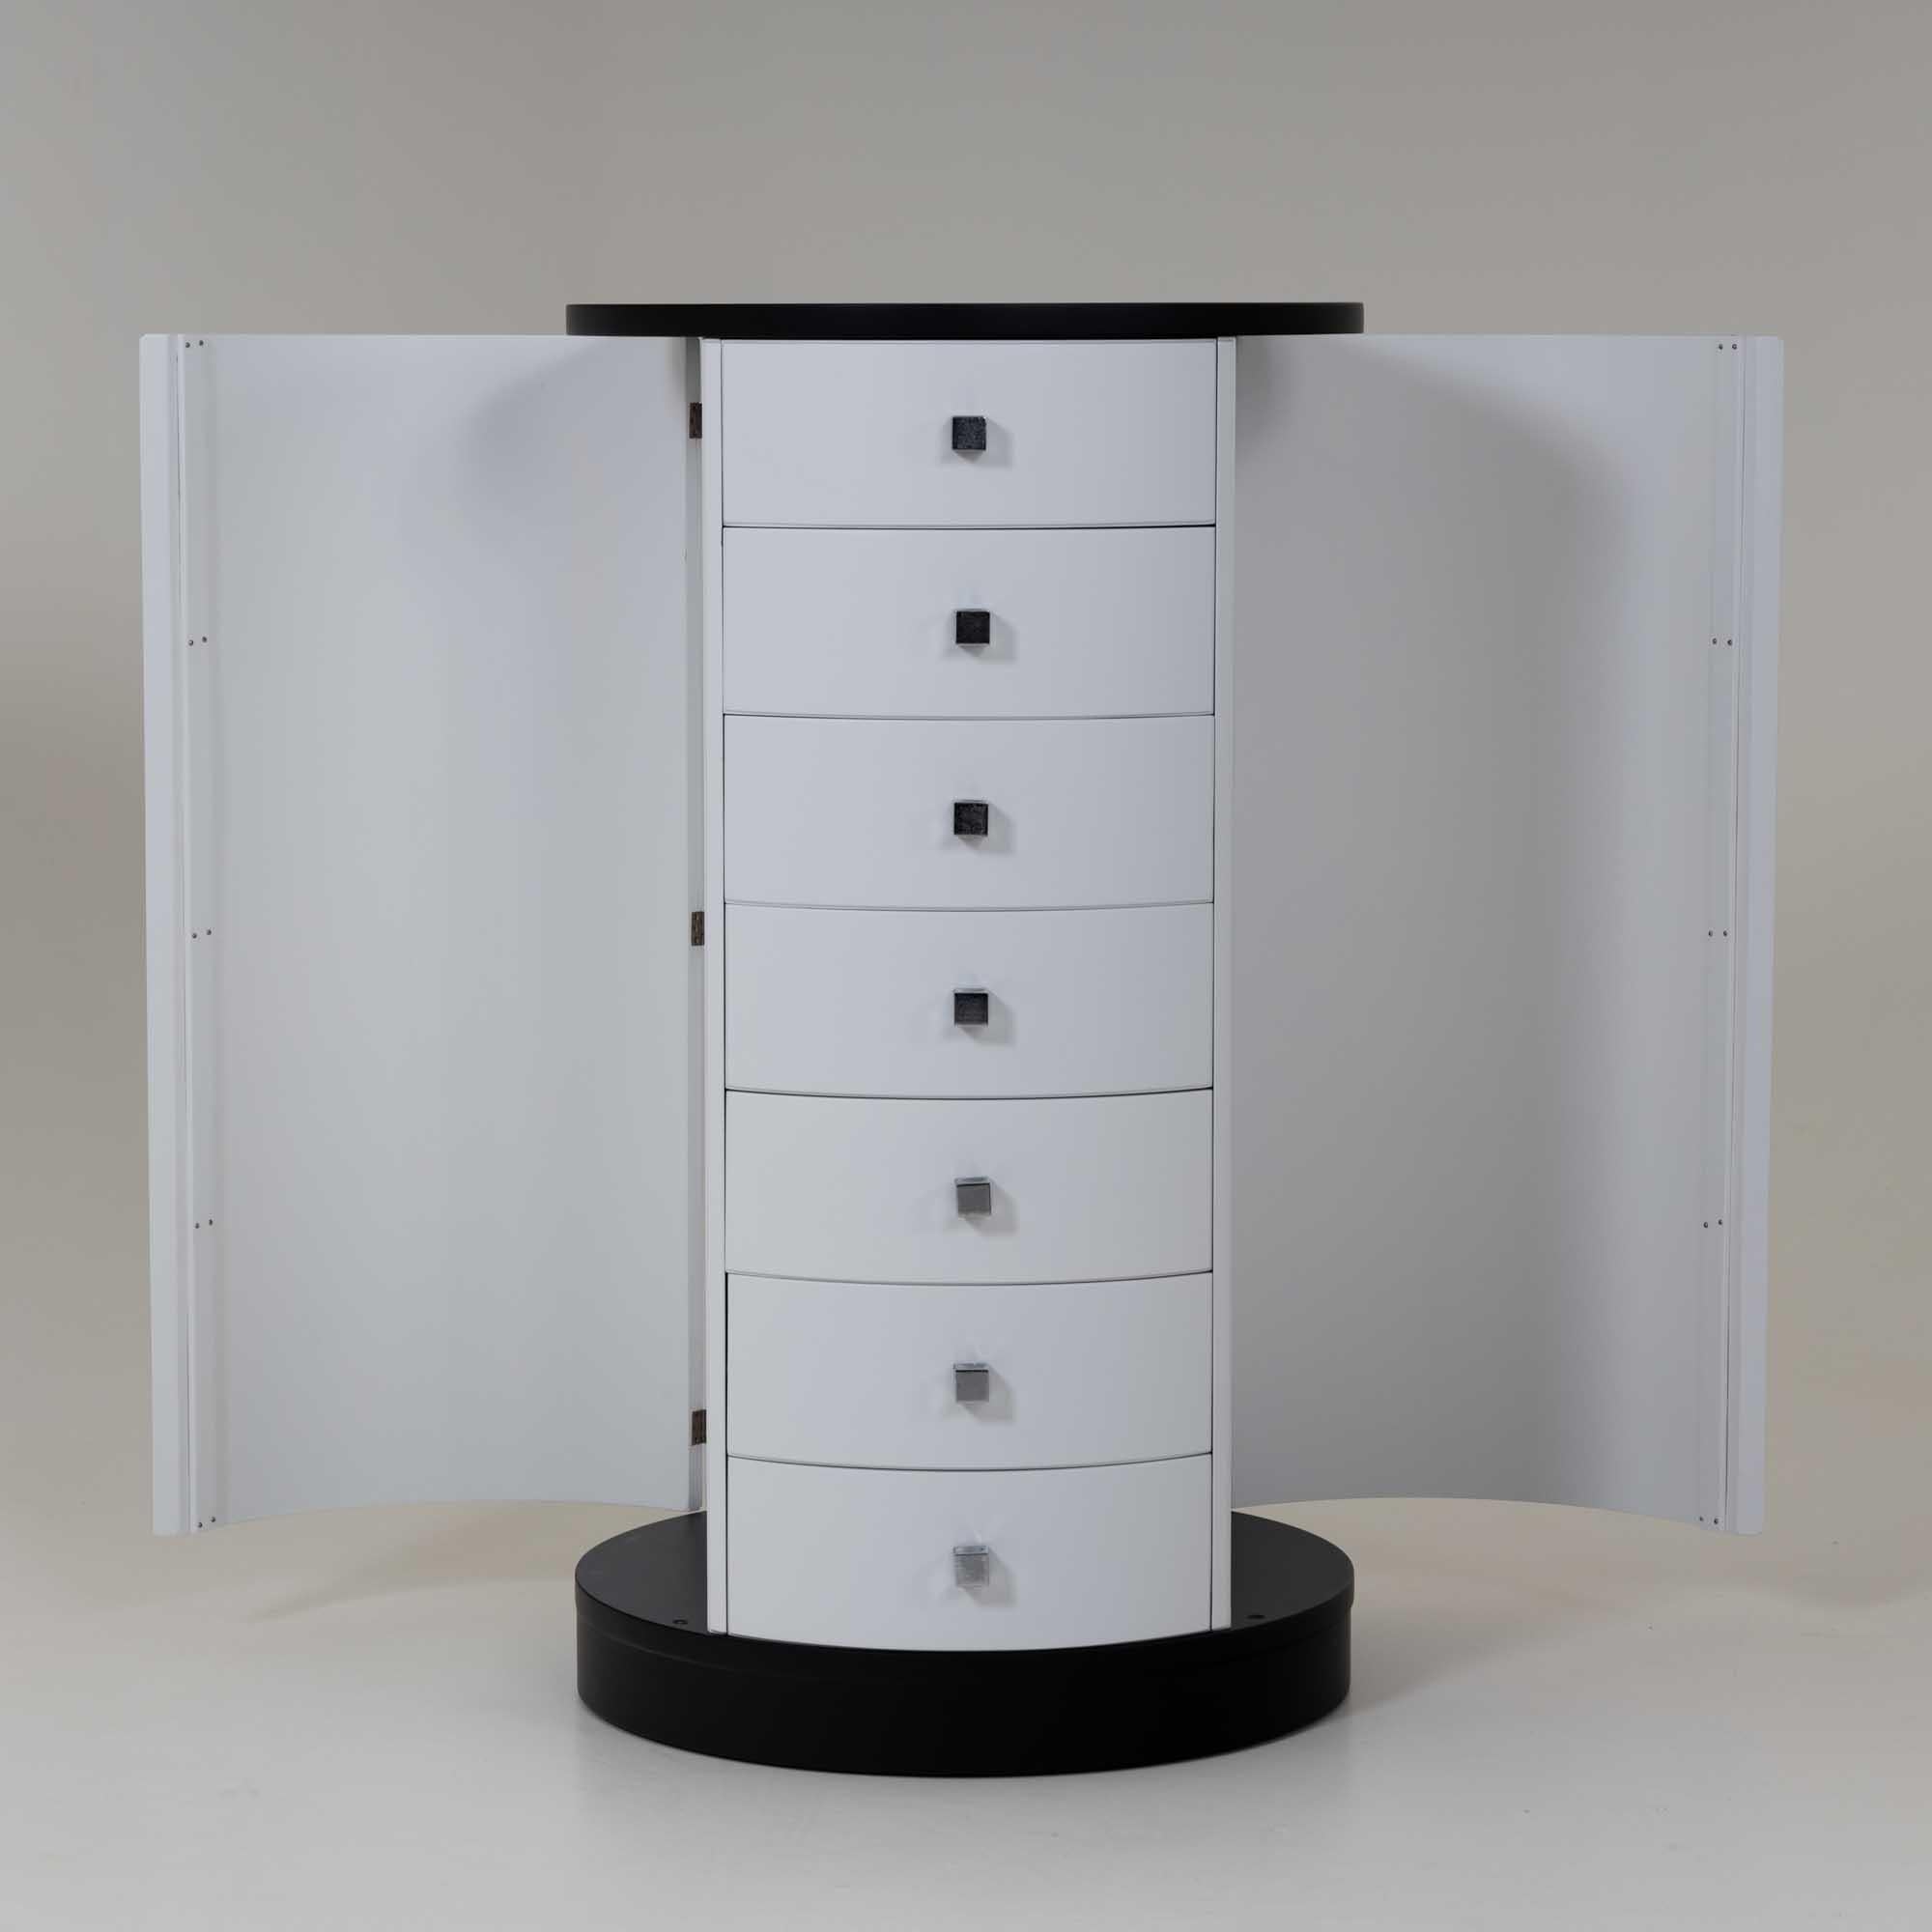 White high chest of drawers with chrome-plated handles and black lacquered top and base. The chest of drawers was designed by Ico Parisi for Fratelli Longhi. The cylindrical shape and the use of seven drawers represent an interesting play on the